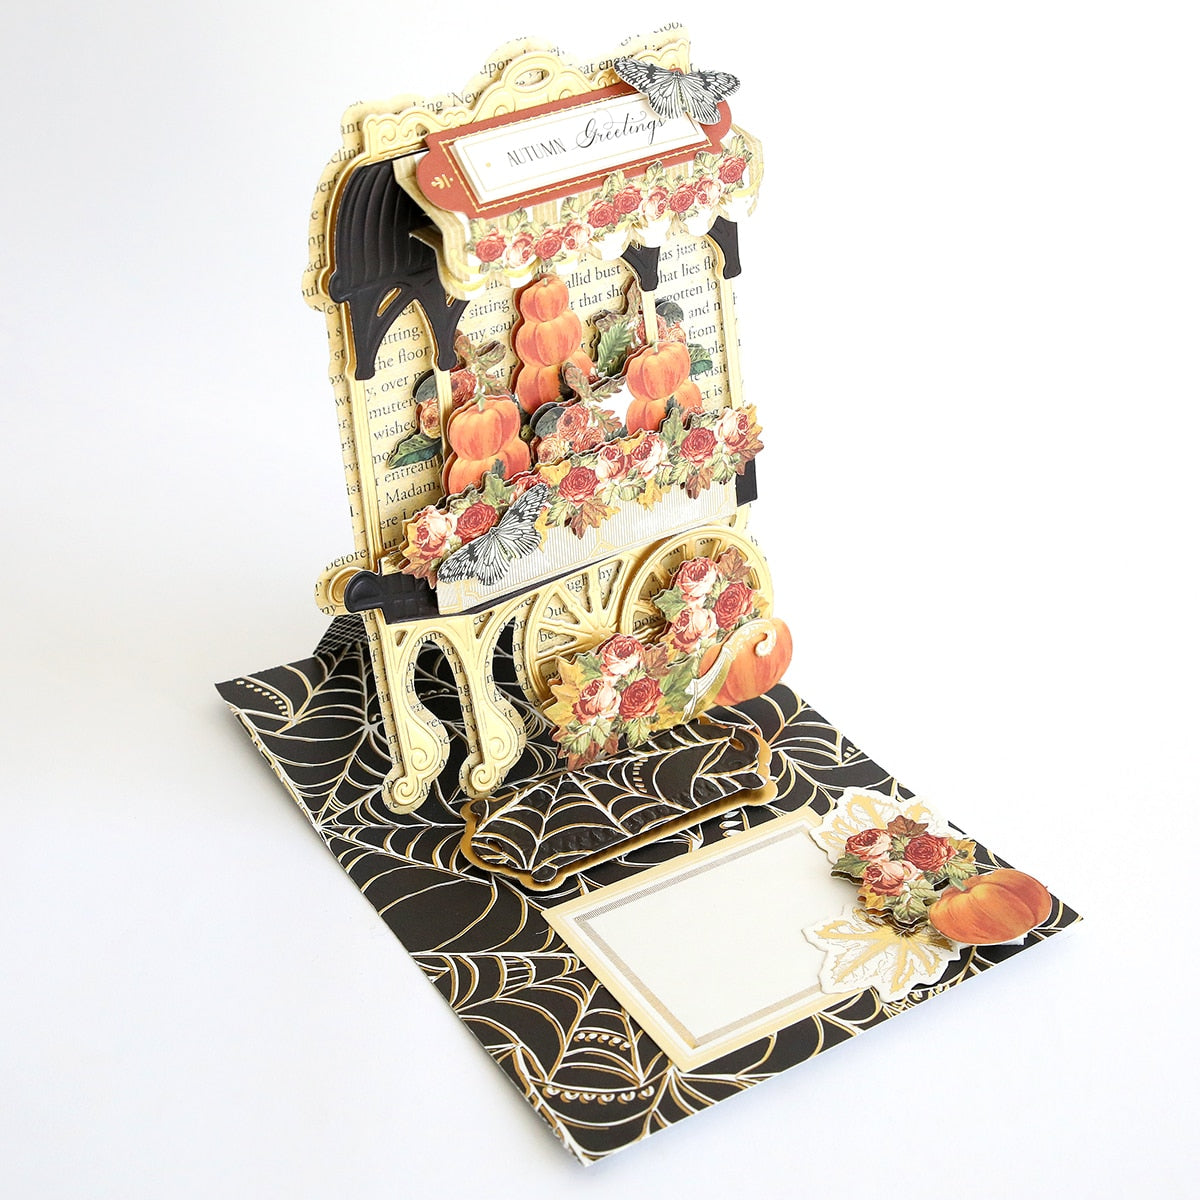 A pop up card with an image of a Haunted Flower Cart/Shop Embellishments.